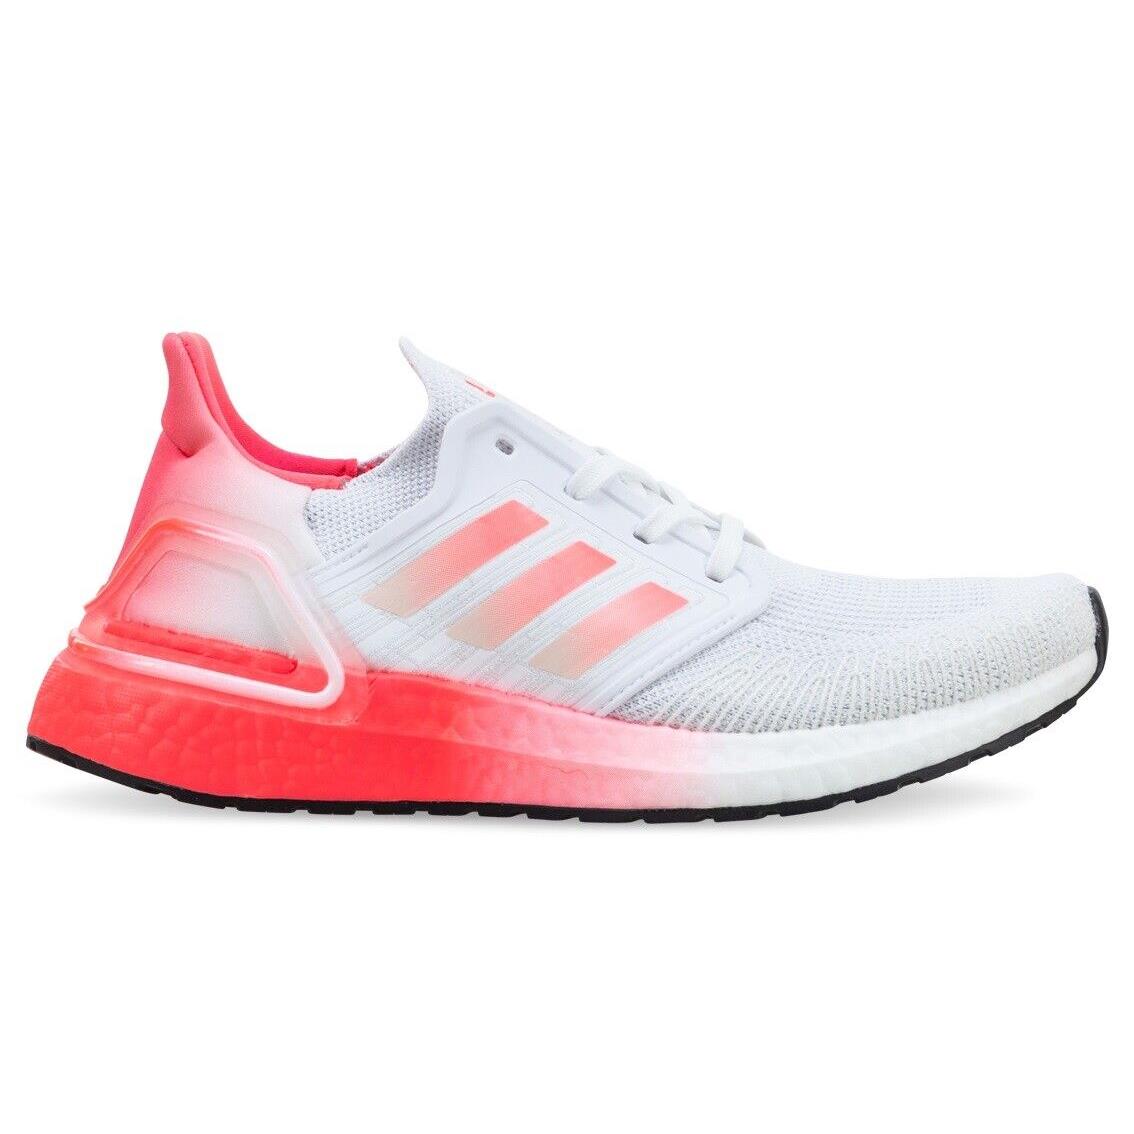 Adidas Ultra Boost 20 Womens EG5201 White Signal Pink Running Shoes Size 10